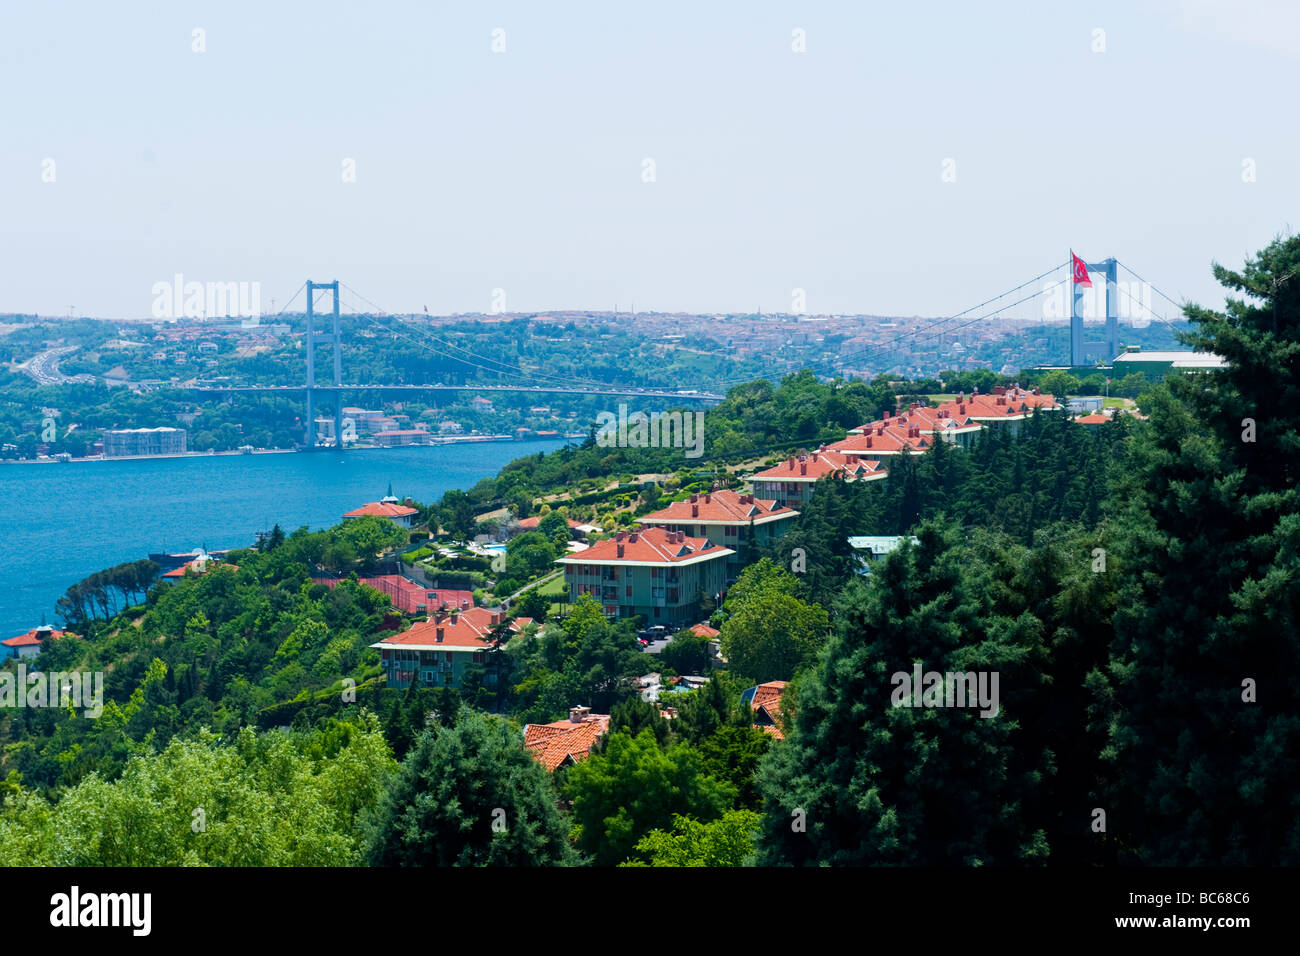 Turkey Istanbul view from the Ulus cafe restaurant on hills overlooking Bosphorous Golden Horn or Halic Corne d ' Or Stock Photo